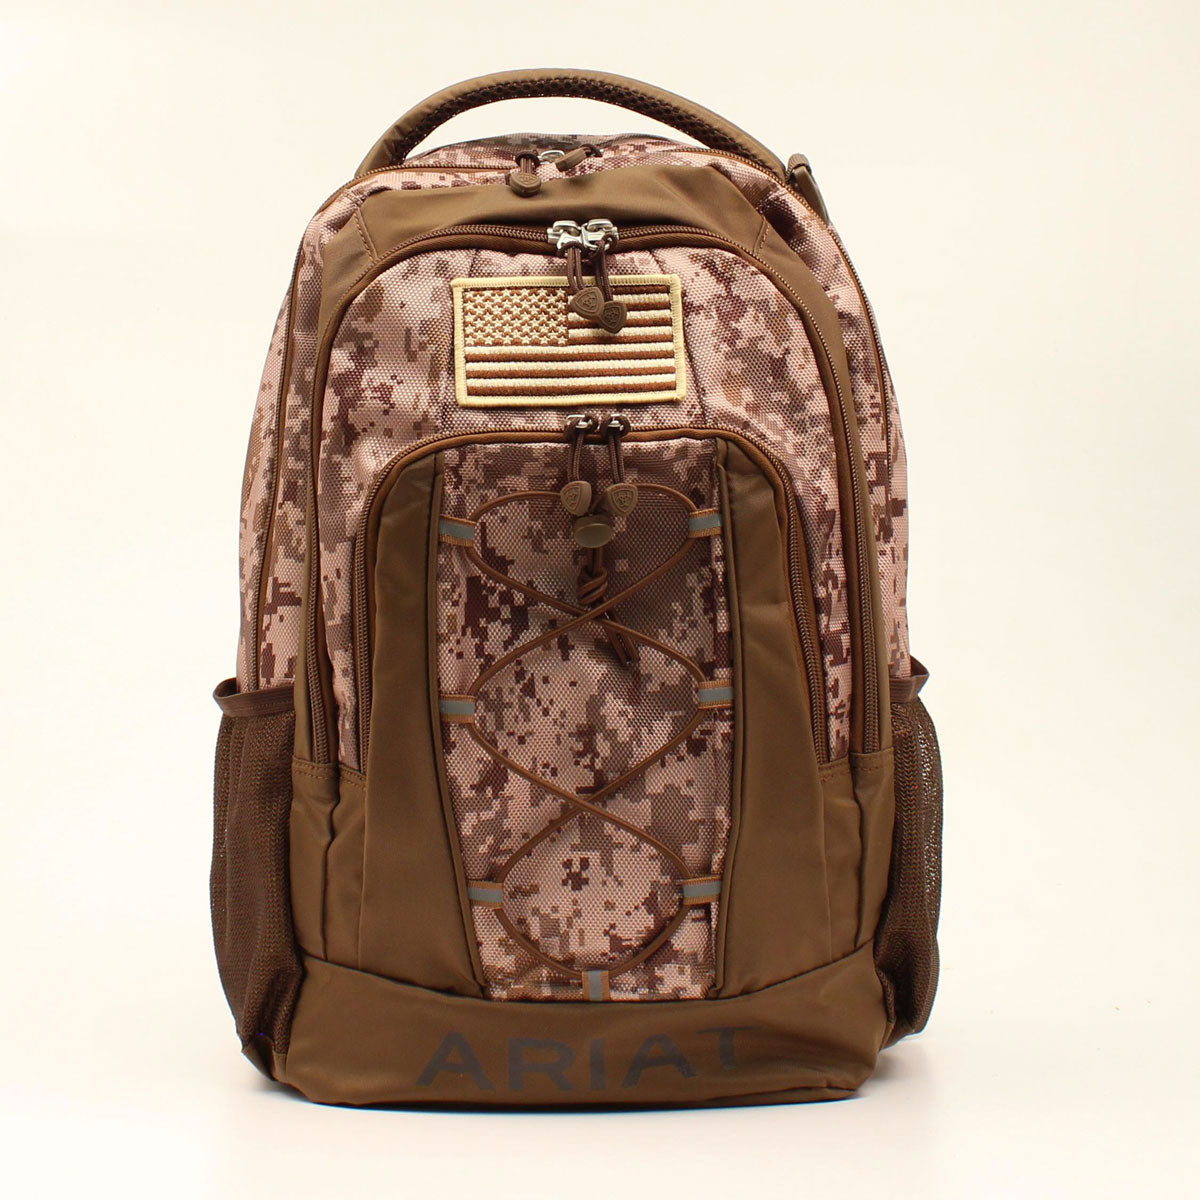 Ariat USA Flag Patch Brown Backpack